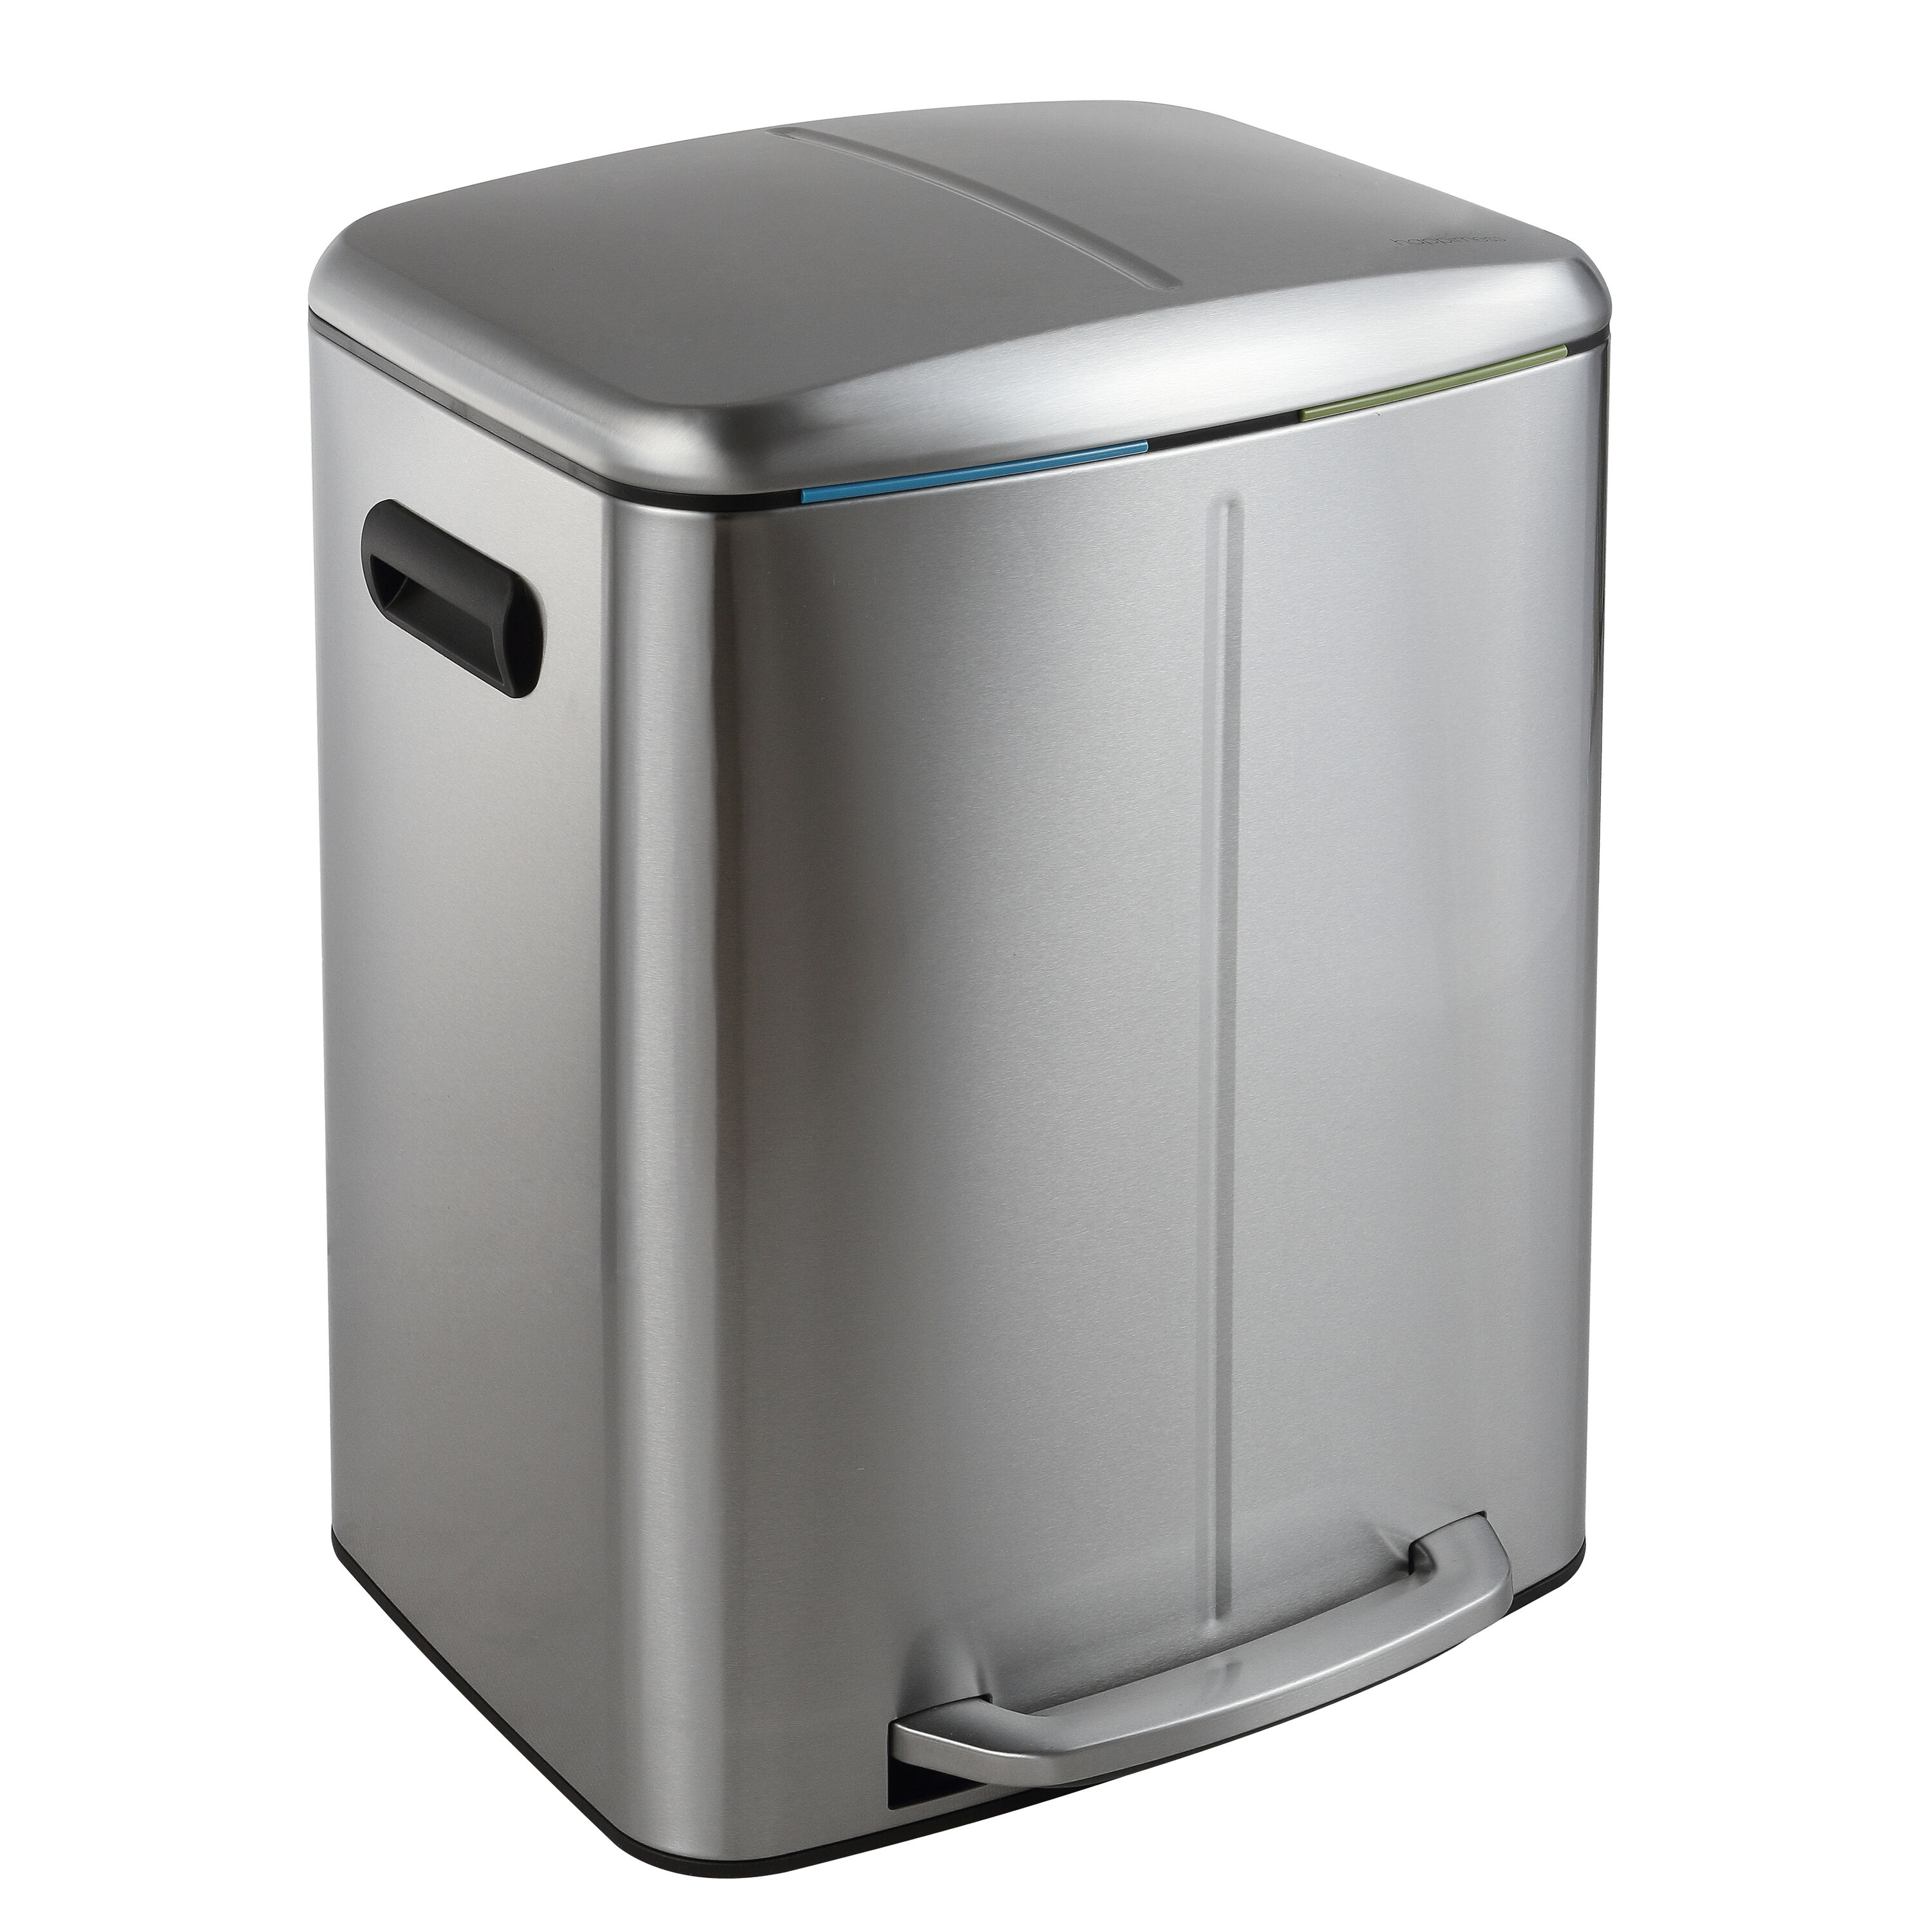 Slim Trash Can, Stainless Steel Trash Can 10.5 Gallon